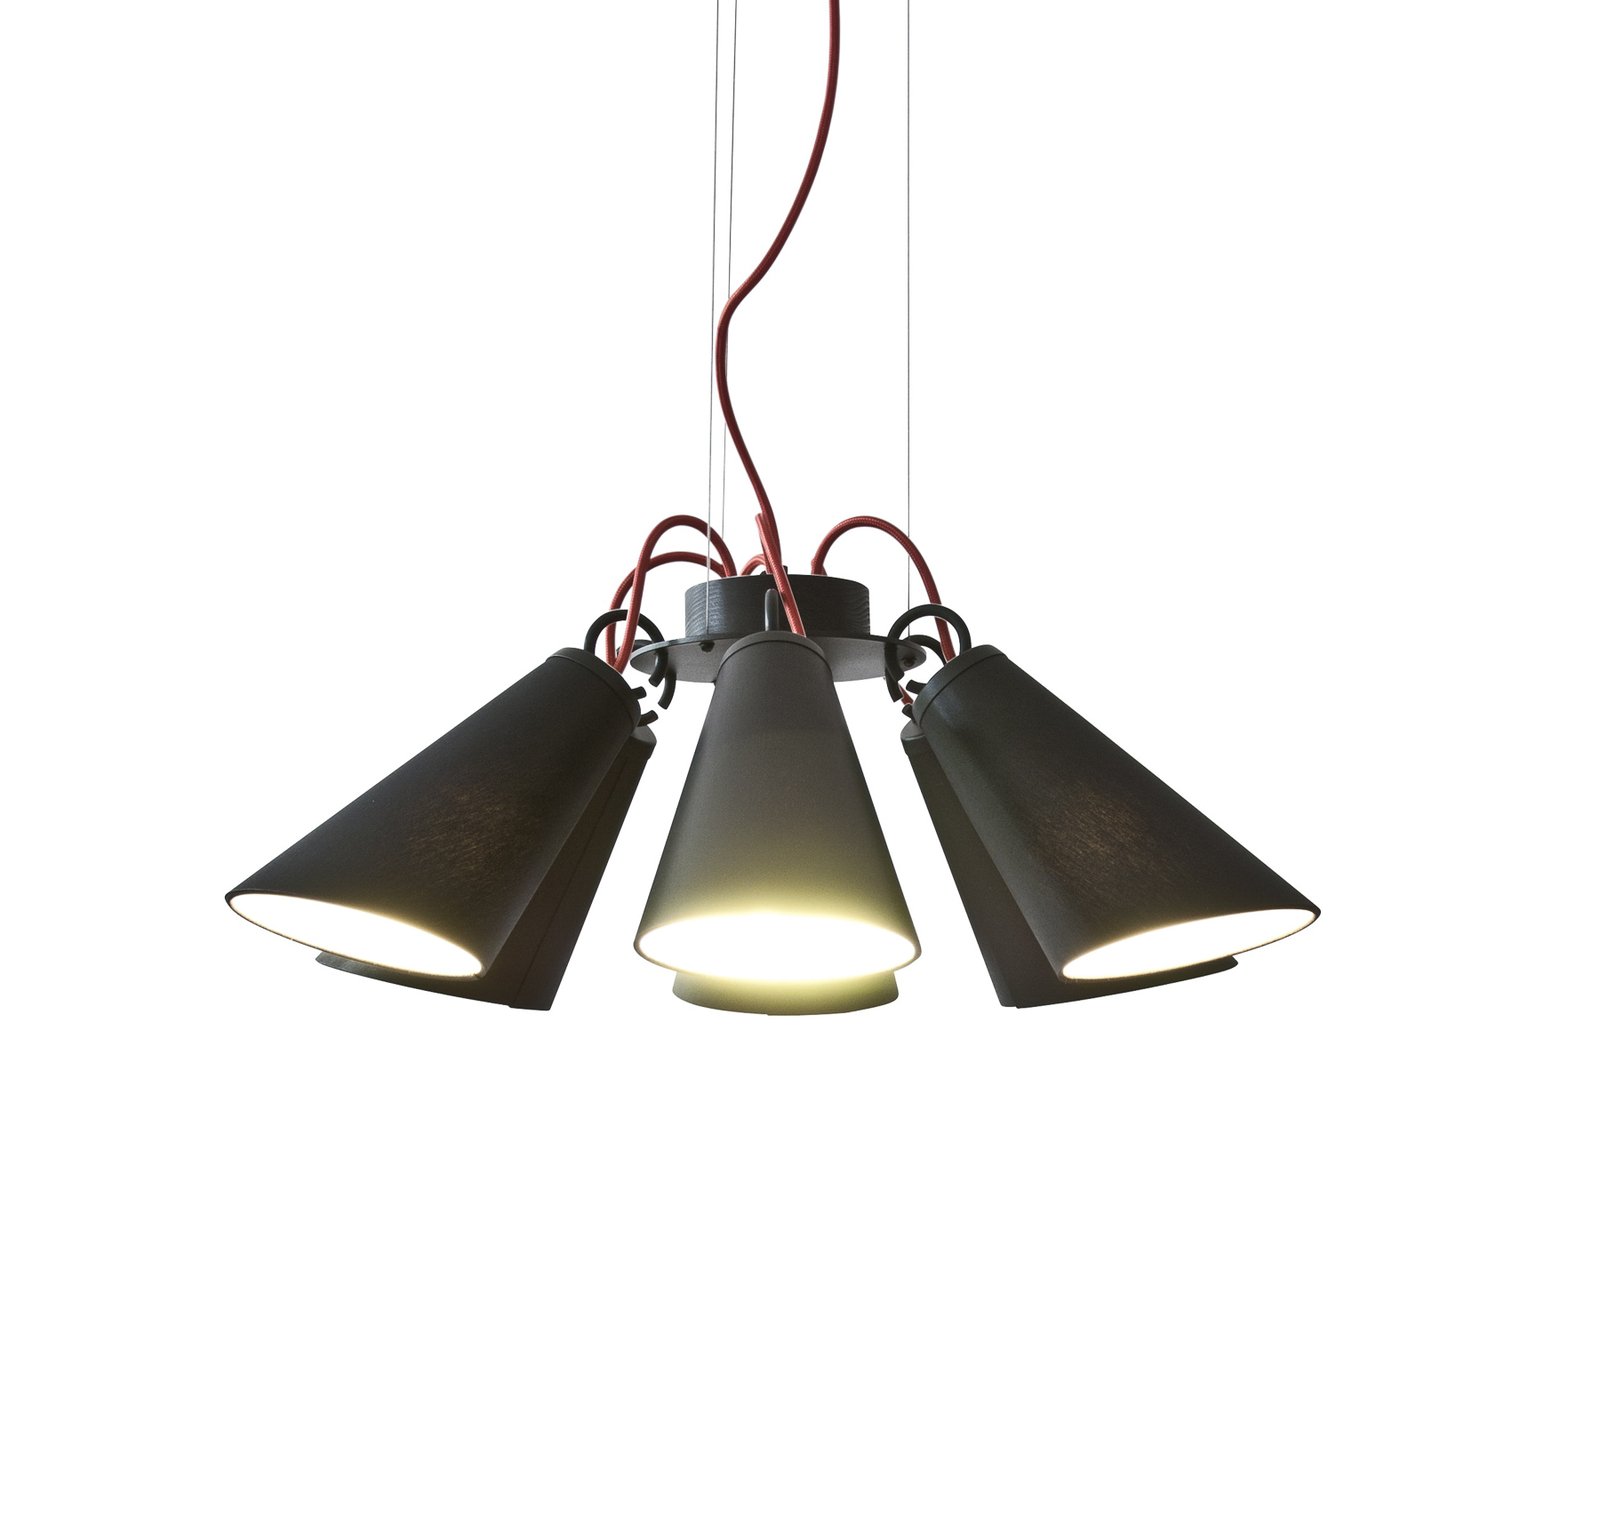 Pit 6 pendant light, black, red fabric cable